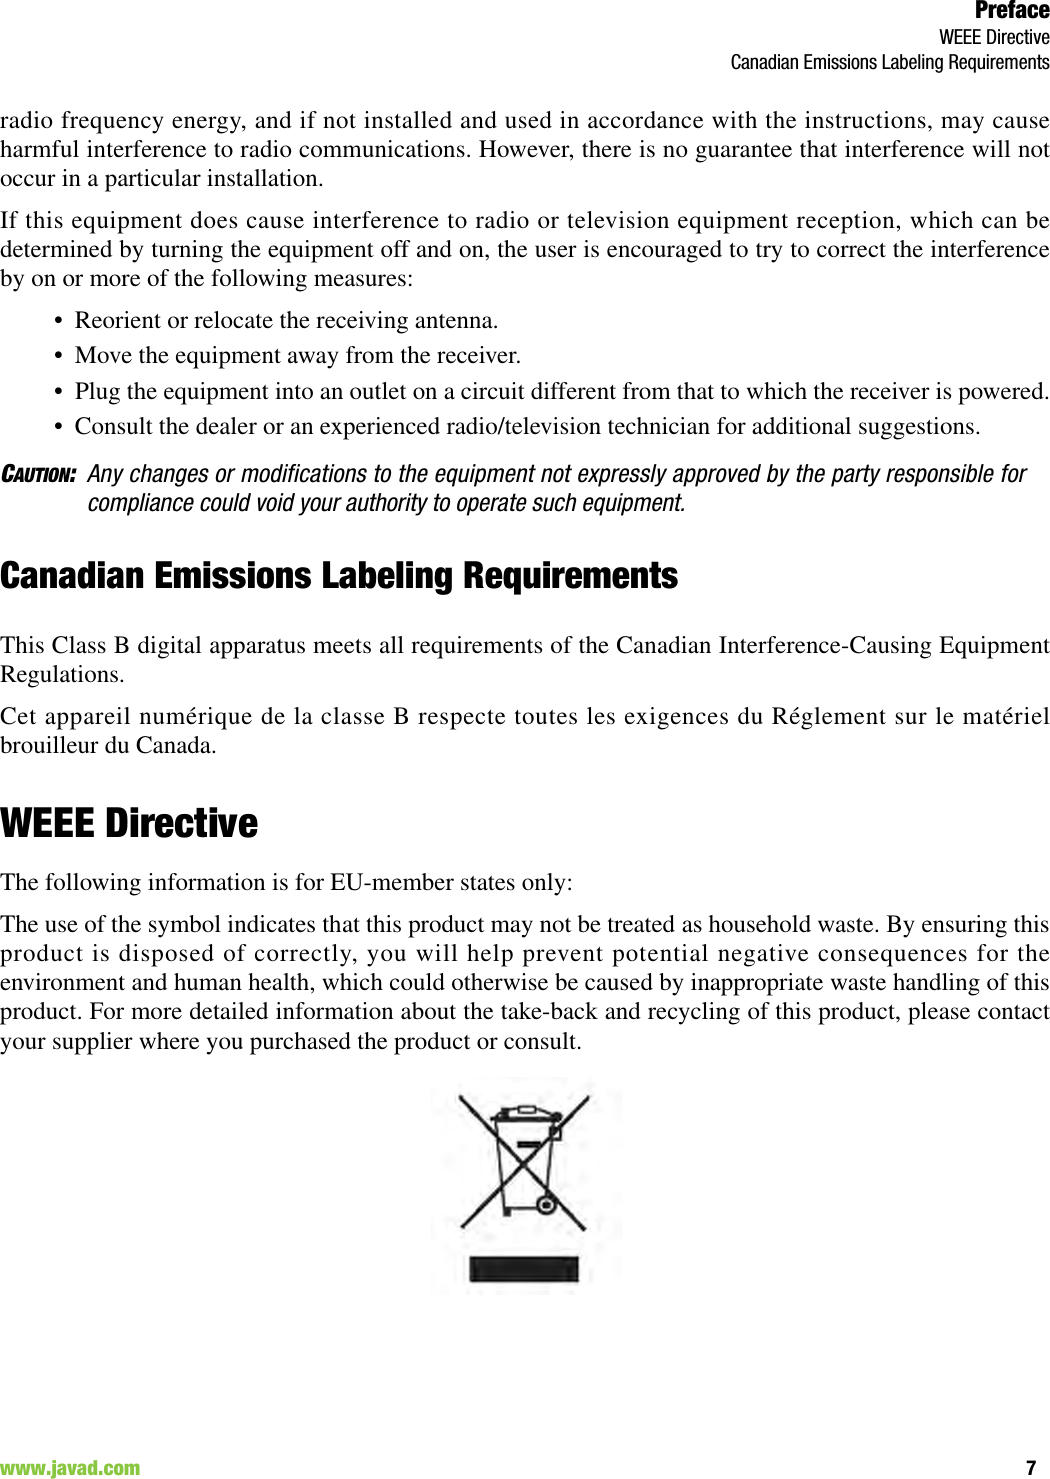 PrefaceWEEE DirectiveCanadian Emissions Labeling Requirements7www.javad.com                                                                                                                                                        radio frequency energy, and if not installed and used in accordance with the instructions, may causeharmful interference to radio communications. However, there is no guarantee that interference will notoccur in a particular installation.If this equipment does cause interference to radio or television equipment reception, which can bedetermined by turning the equipment off and on, the user is encouraged to try to correct the interferenceby on or more of the following measures:• Reorient or relocate the receiving antenna.• Move the equipment away from the receiver.• Plug the equipment into an outlet on a circuit different from that to which the receiver is powered.• Consult the dealer or an experienced radio/television technician for additional suggestions.CAUTION:Any changes or modifications to the equipment not expressly approved by the party responsible forcompliance could void your authority to operate such equipment.Canadian Emissions Labeling RequirementsThis Class B digital apparatus meets all requirements of the Canadian Interference-Causing EquipmentRegulations.Cet appareil numérique de la classe B respecte toutes les exigences du Réglement sur le matérielbrouilleur du Canada.WEEE DirectiveThe following information is for EU-member states only:The use of the symbol indicates that this product may not be treated as household waste. By ensuring thisproduct is disposed of correctly, you will help prevent potential negative consequences for theenvironment and human health, which could otherwise be caused by inappropriate waste handling of thisproduct. For more detailed information about the take-back and recycling of this product, please contactyour supplier where you purchased the product or consult. 